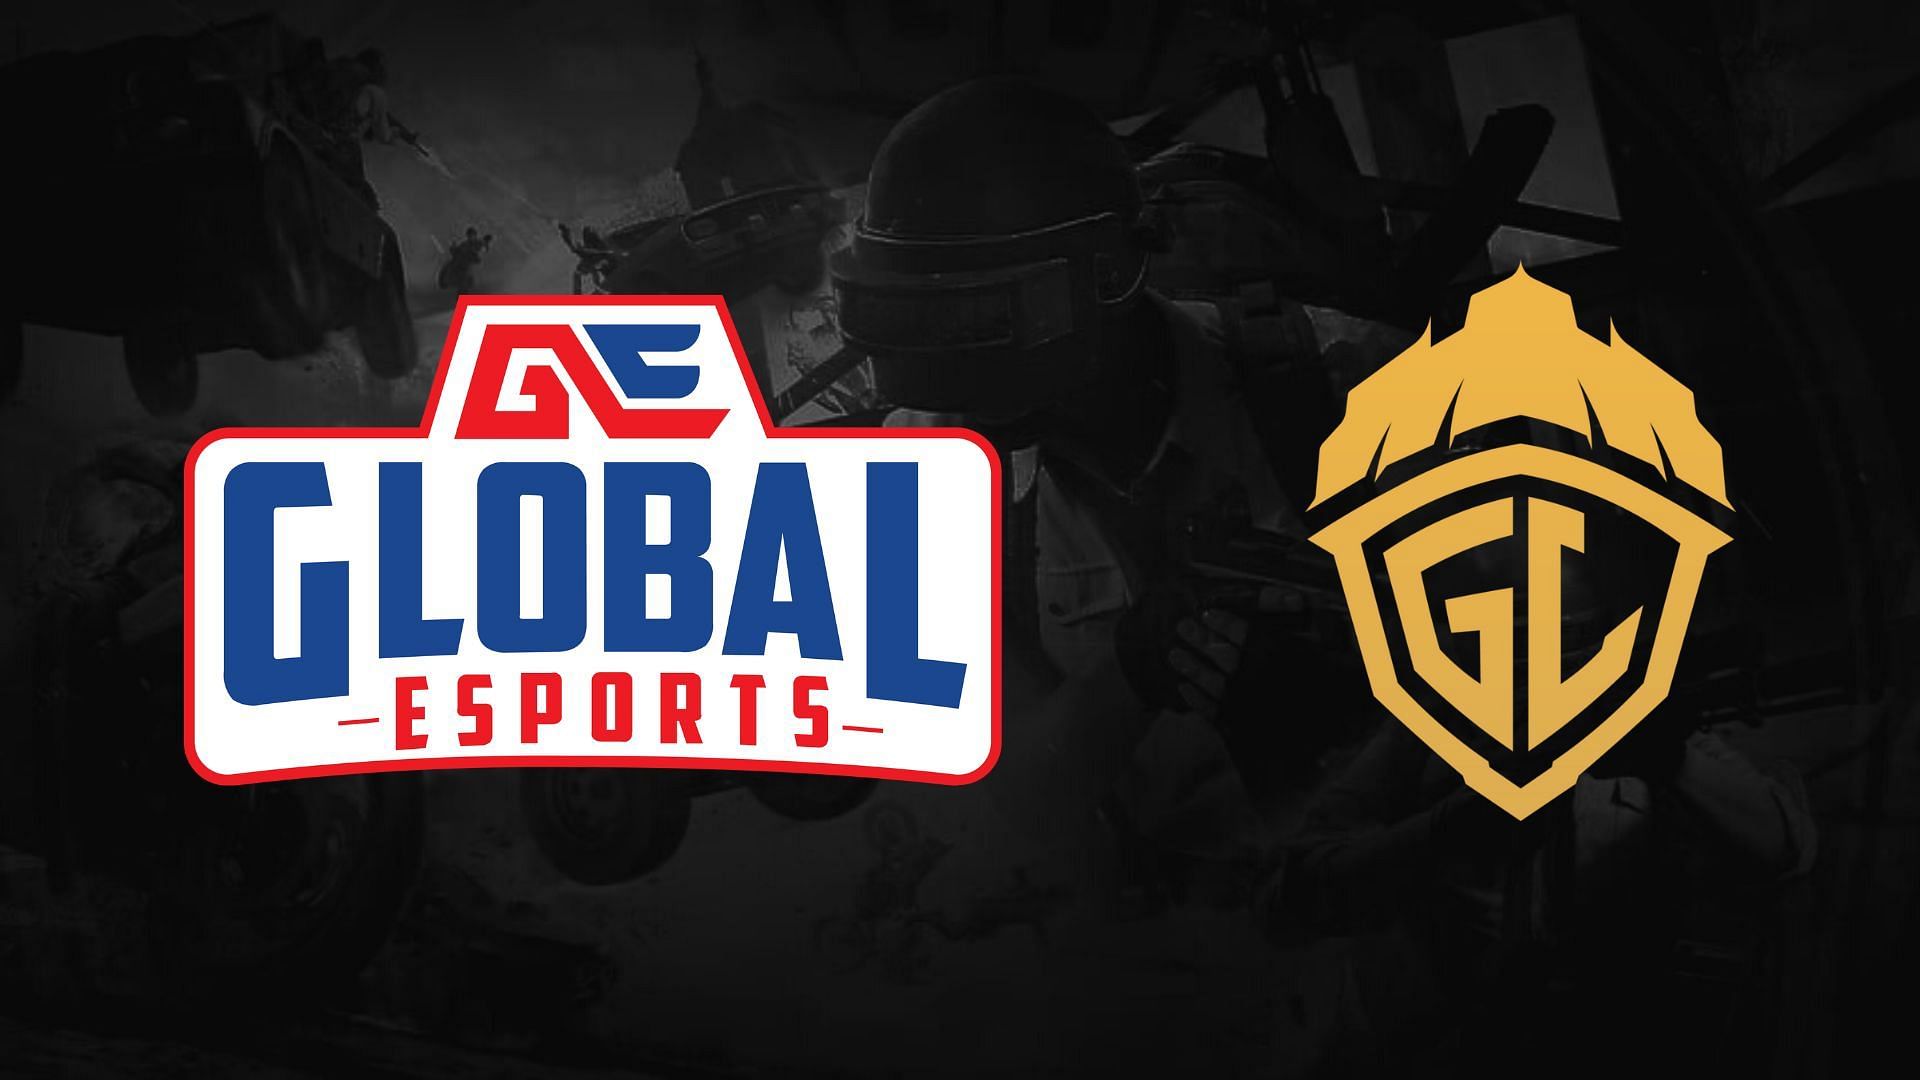 GodLike Esports and Global Esports indulge in drop clashes which gives rise to online controversy (Image via Sportskeeda)